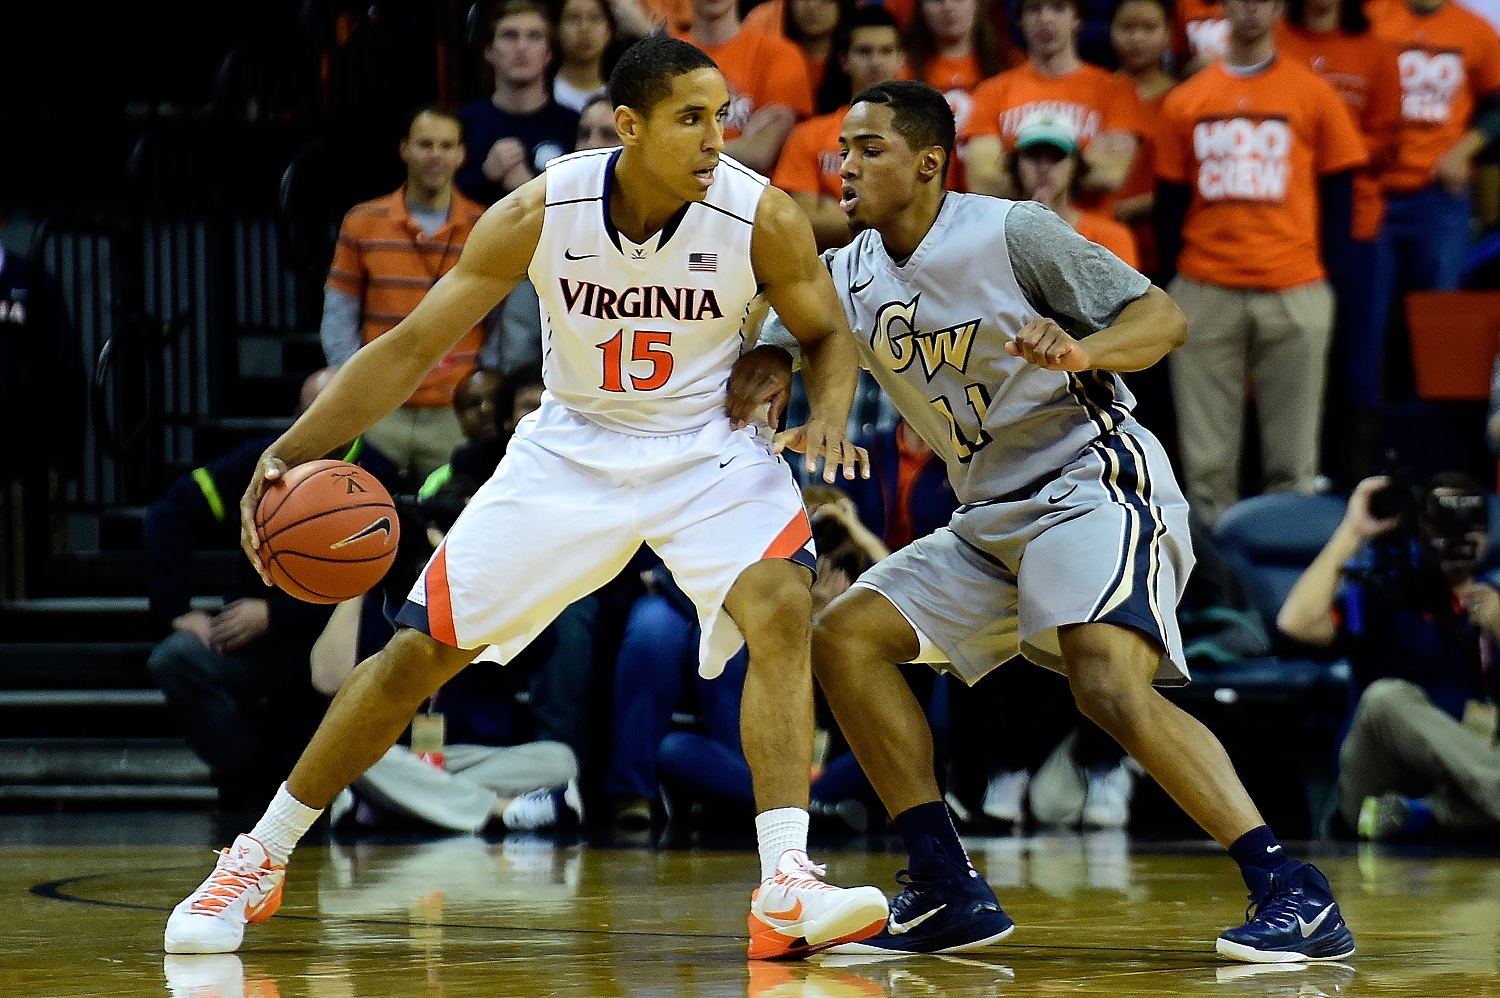 CHARLOTTESVILLE, VA - NOVEMBER 21:  Malcolm Brogdon #15 of the Virginia Cavaliers drives to the basket against Kethan Savage #11 of the George Washington Colonials in the first half during a game at John Paul Jones Arena on November 21, 2014 in Charlottesville, Virginia.  (Photo by Patrick McDermott/Getty Images)